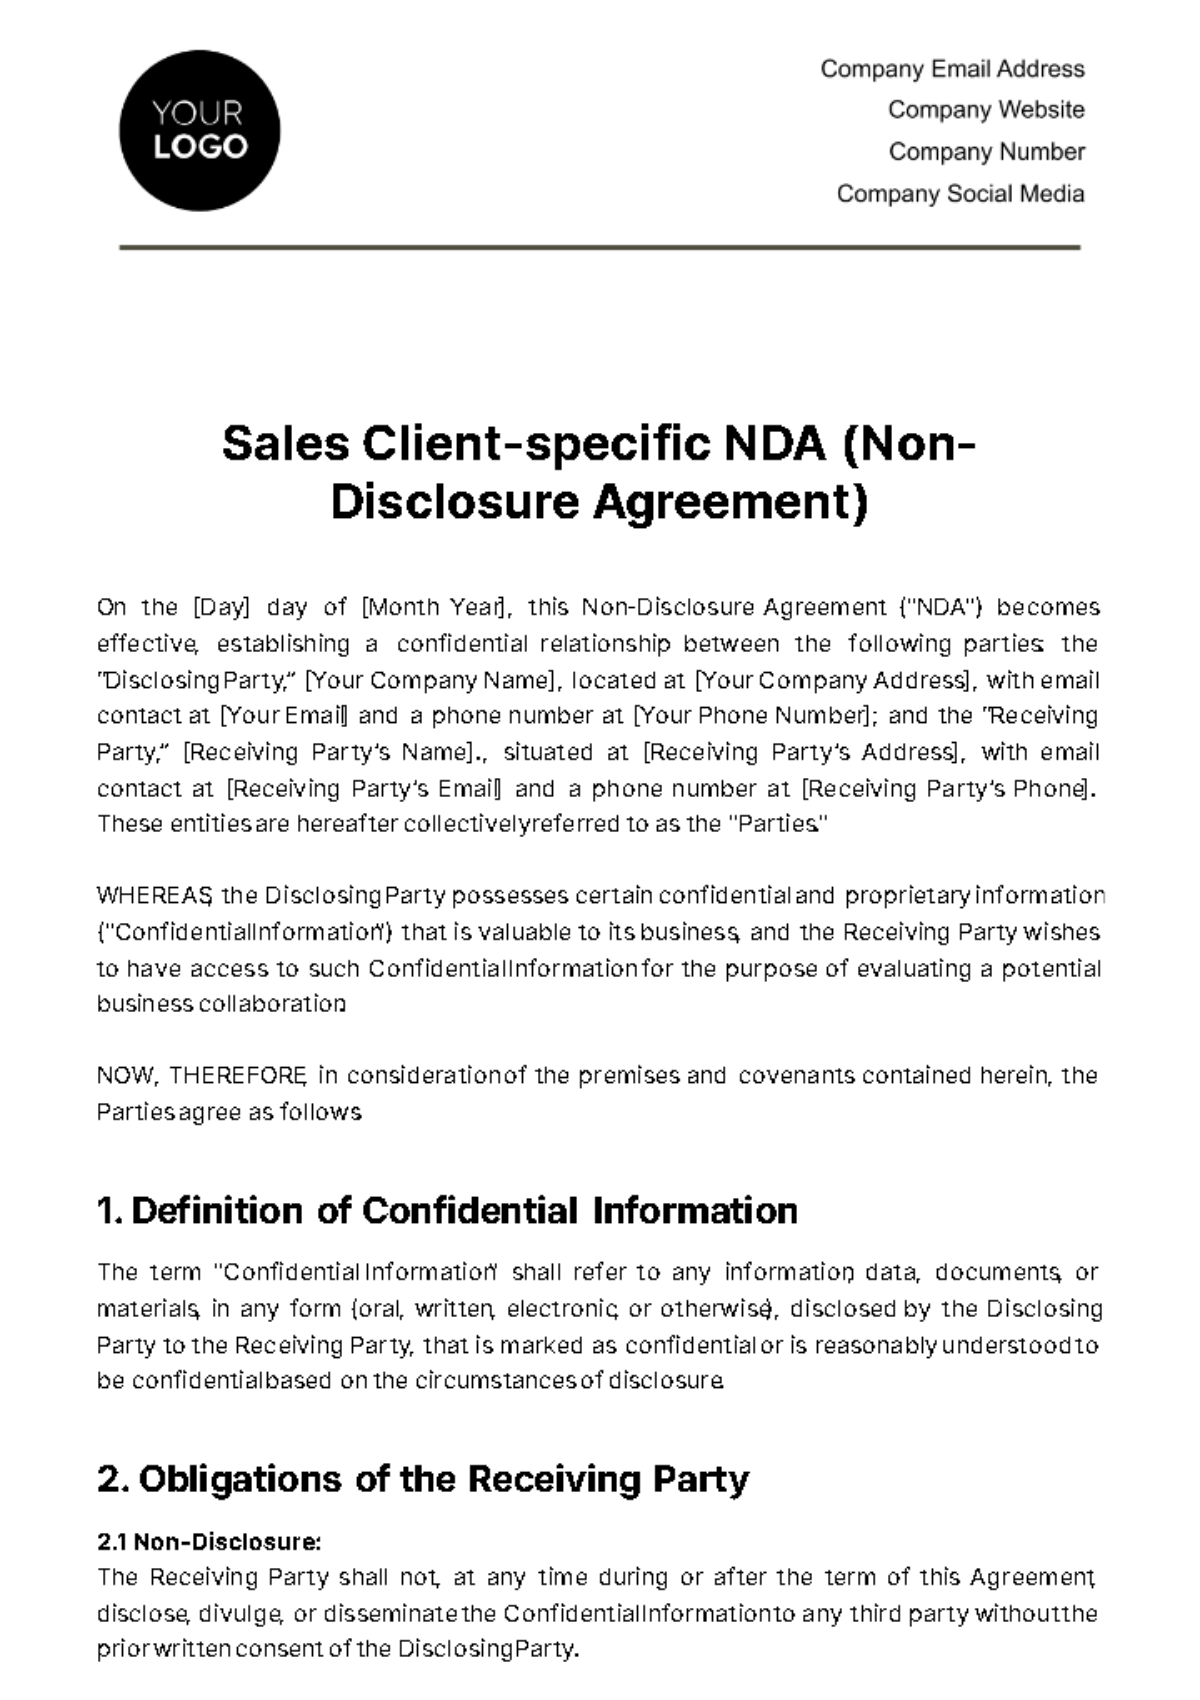 Free Sales Client-specific NDA (Non-Disclosure Agreement) Template